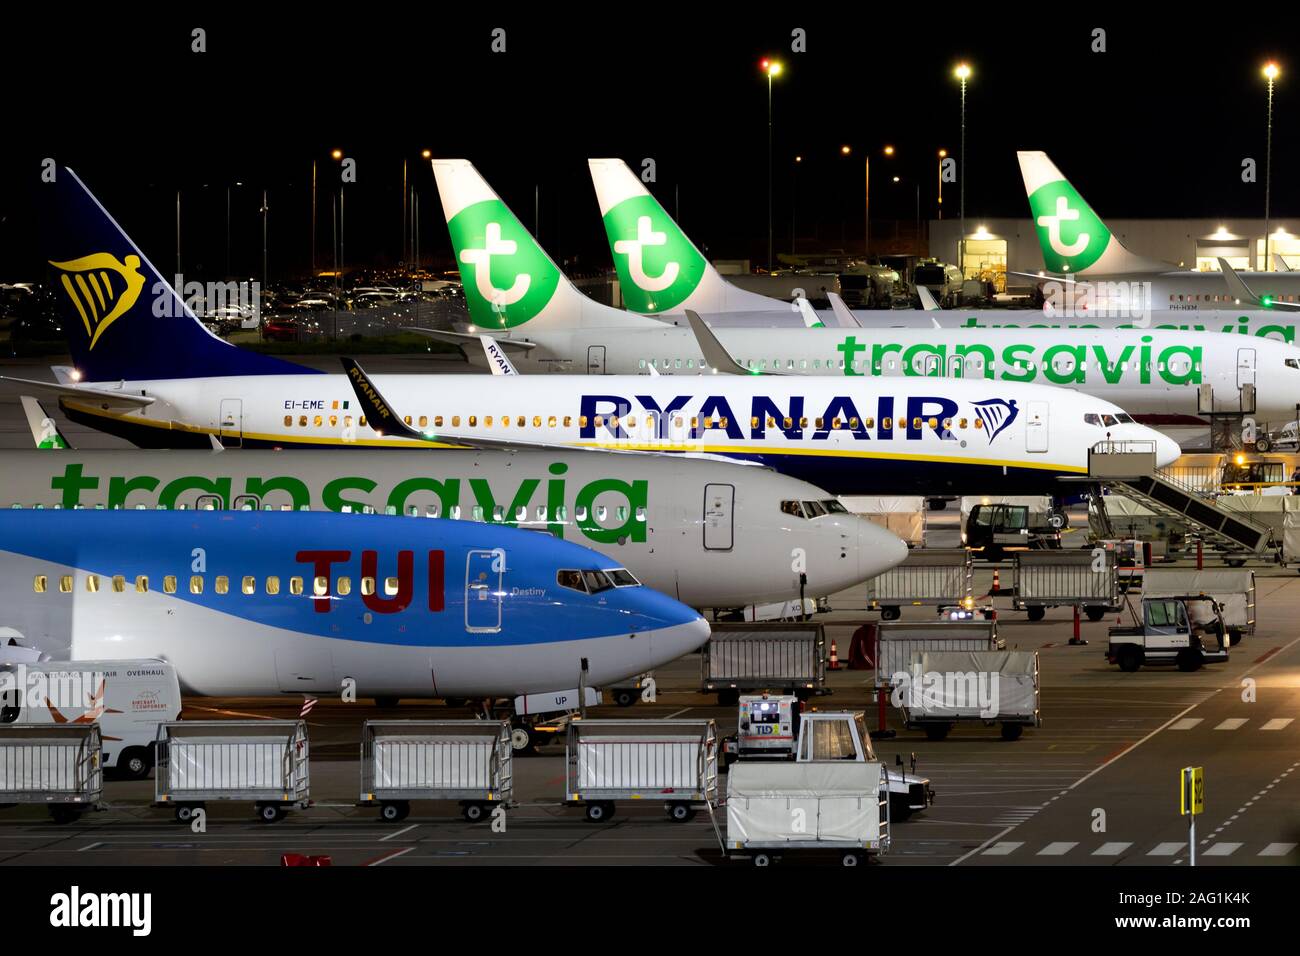 EINDHOVEN, THE NETHERLANDS - OCT 14, 2019: Night view of low-budget airlines Ryanair and Transavia aircraft parked at the terminal of Eindhoven Airpor Stock Photo